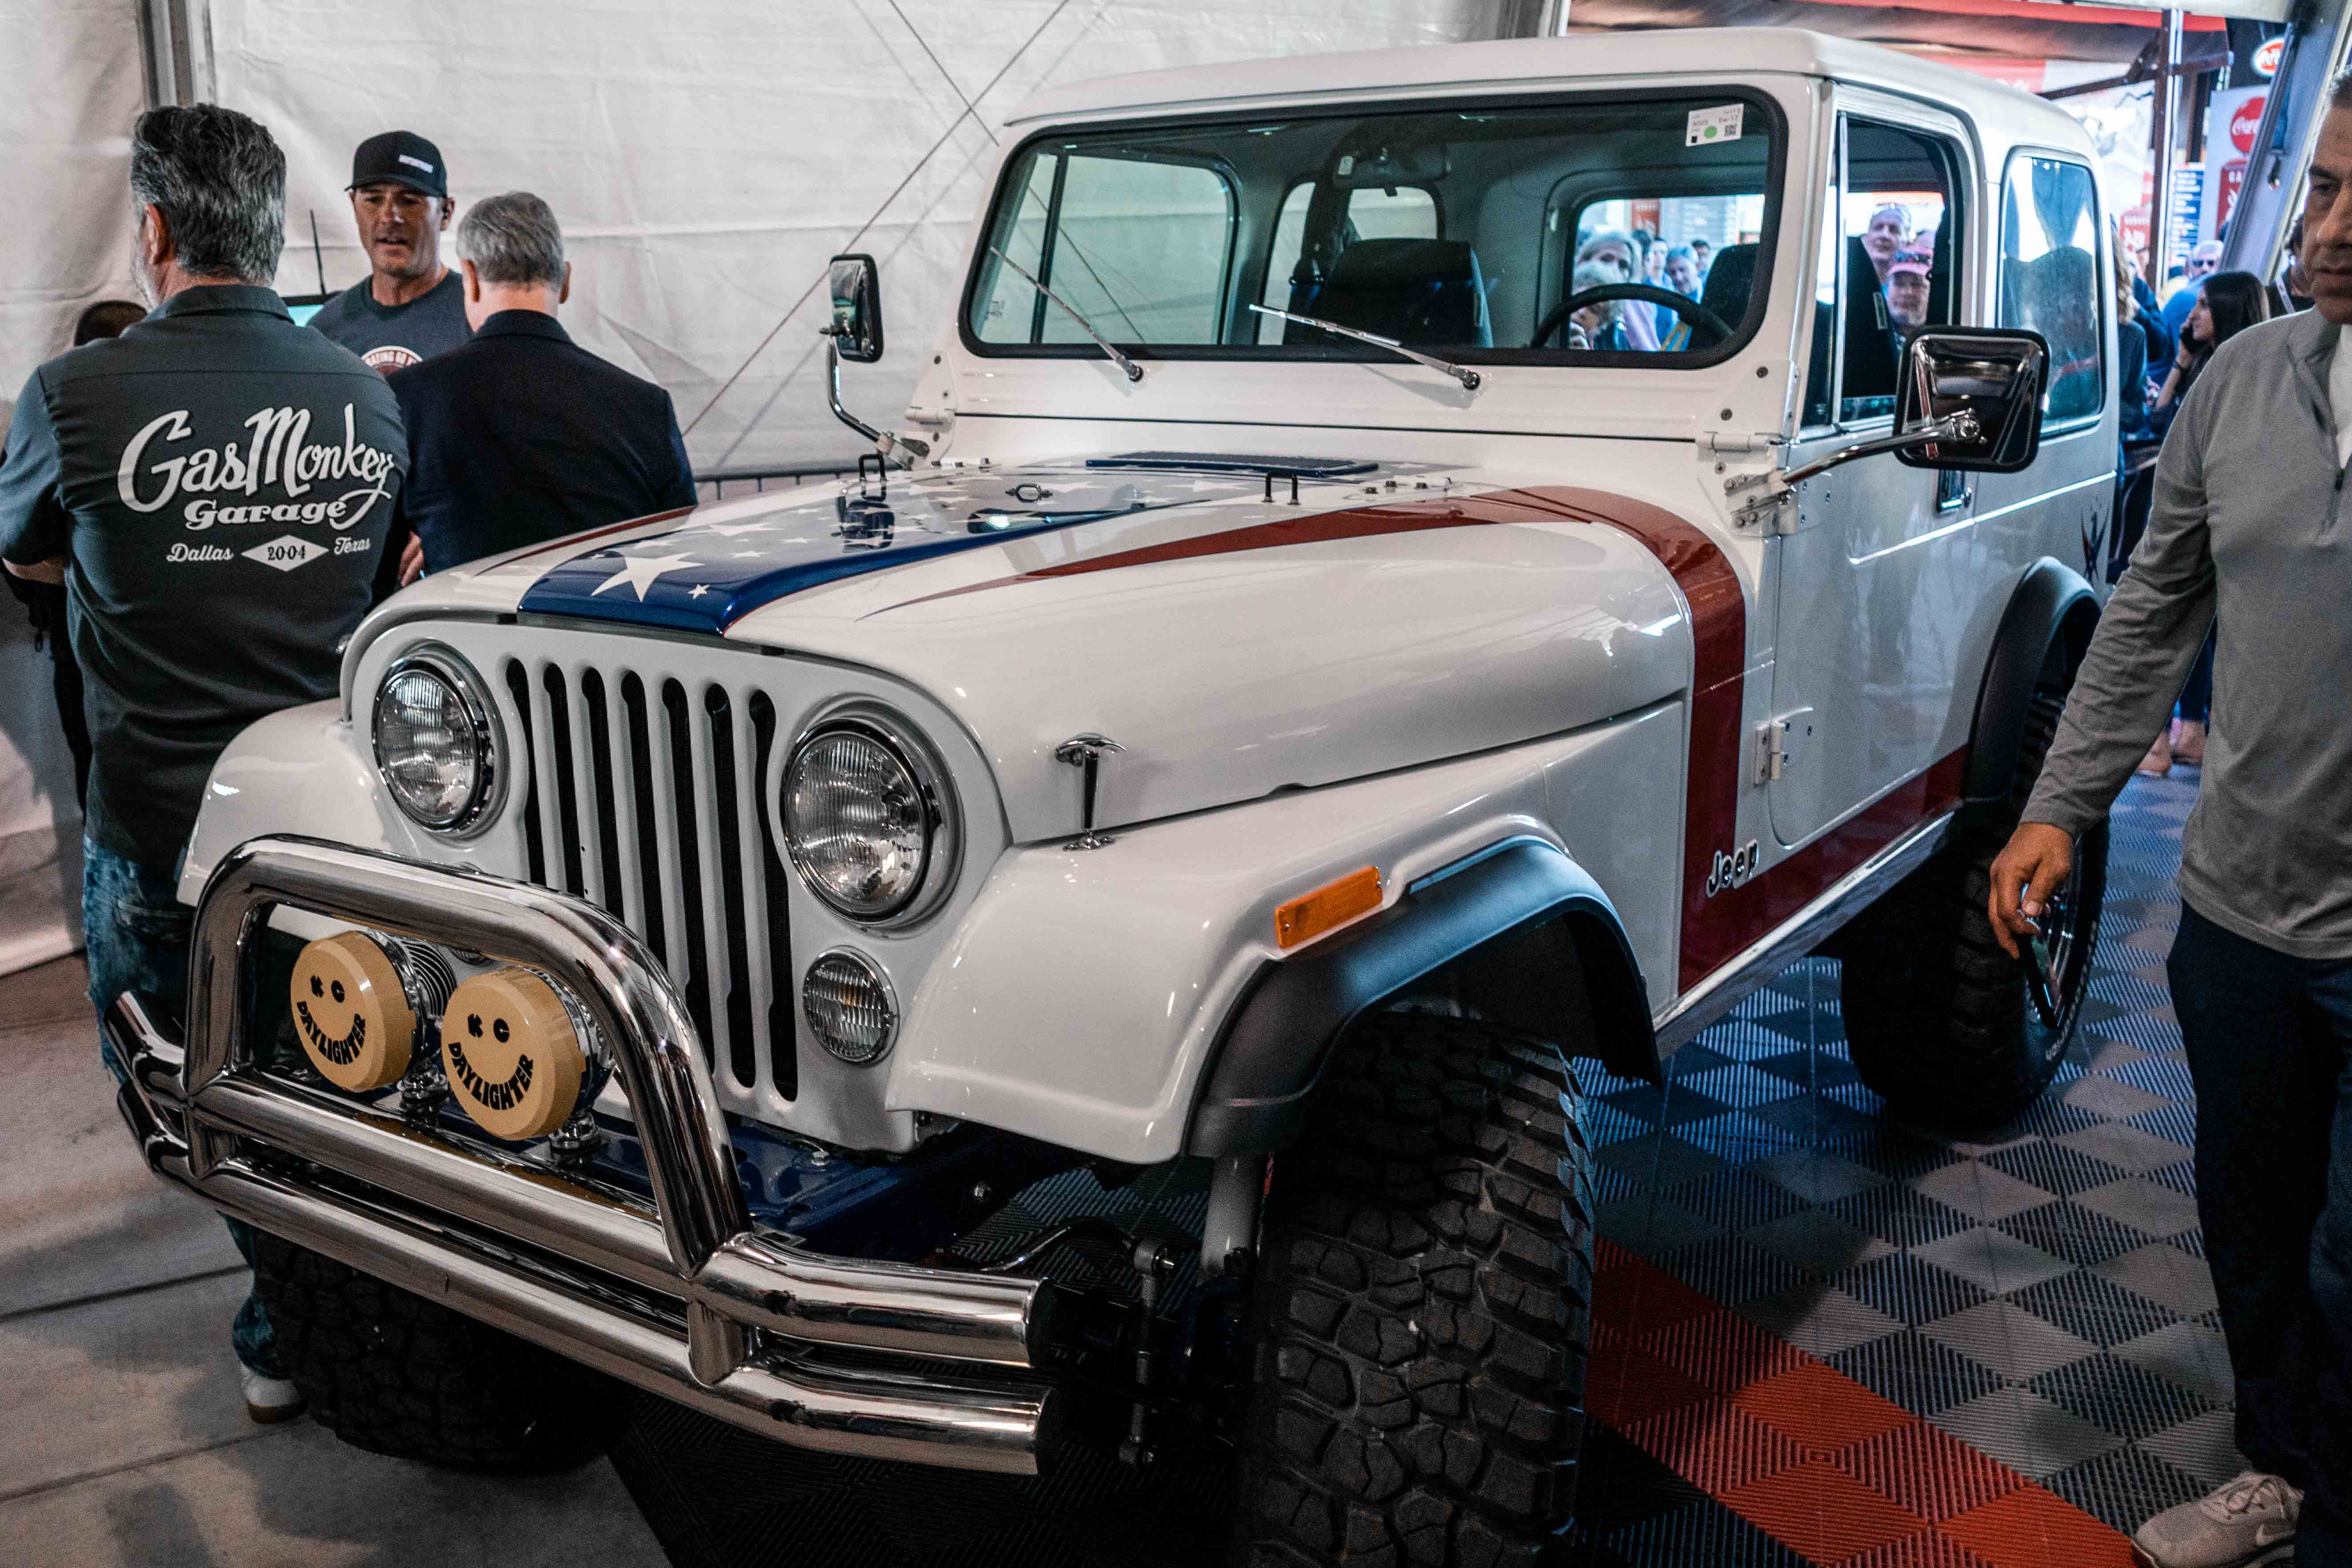 A total of $1.3 million was raised for charity during the sale of this custom 1981 Jeep CJ7 built for the Gary Sinise Foundation during the Barrett-Jackson collector car auction in Scottsdale, Arizona. | Rebecca Nguyen photos